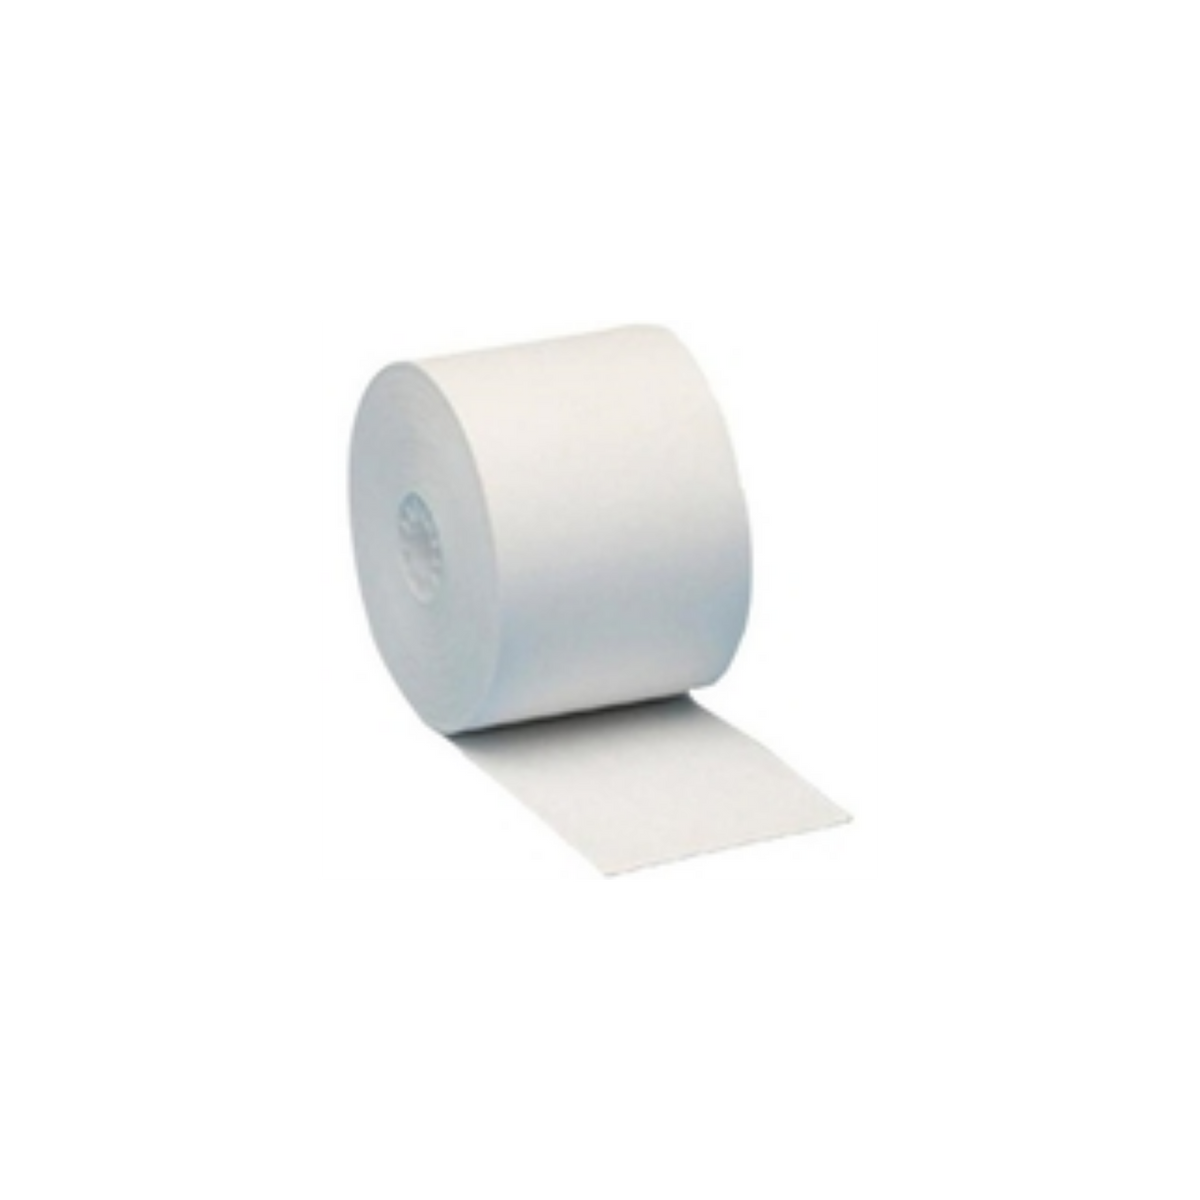 Thermamark, Consumables, Thermal Receipt Paper, 2.25"(58mm)X 34'(10.36m), Coreless, 1.06"(26.92mm)OD, White, BPA Free, 100 RPC, Priced Per Case